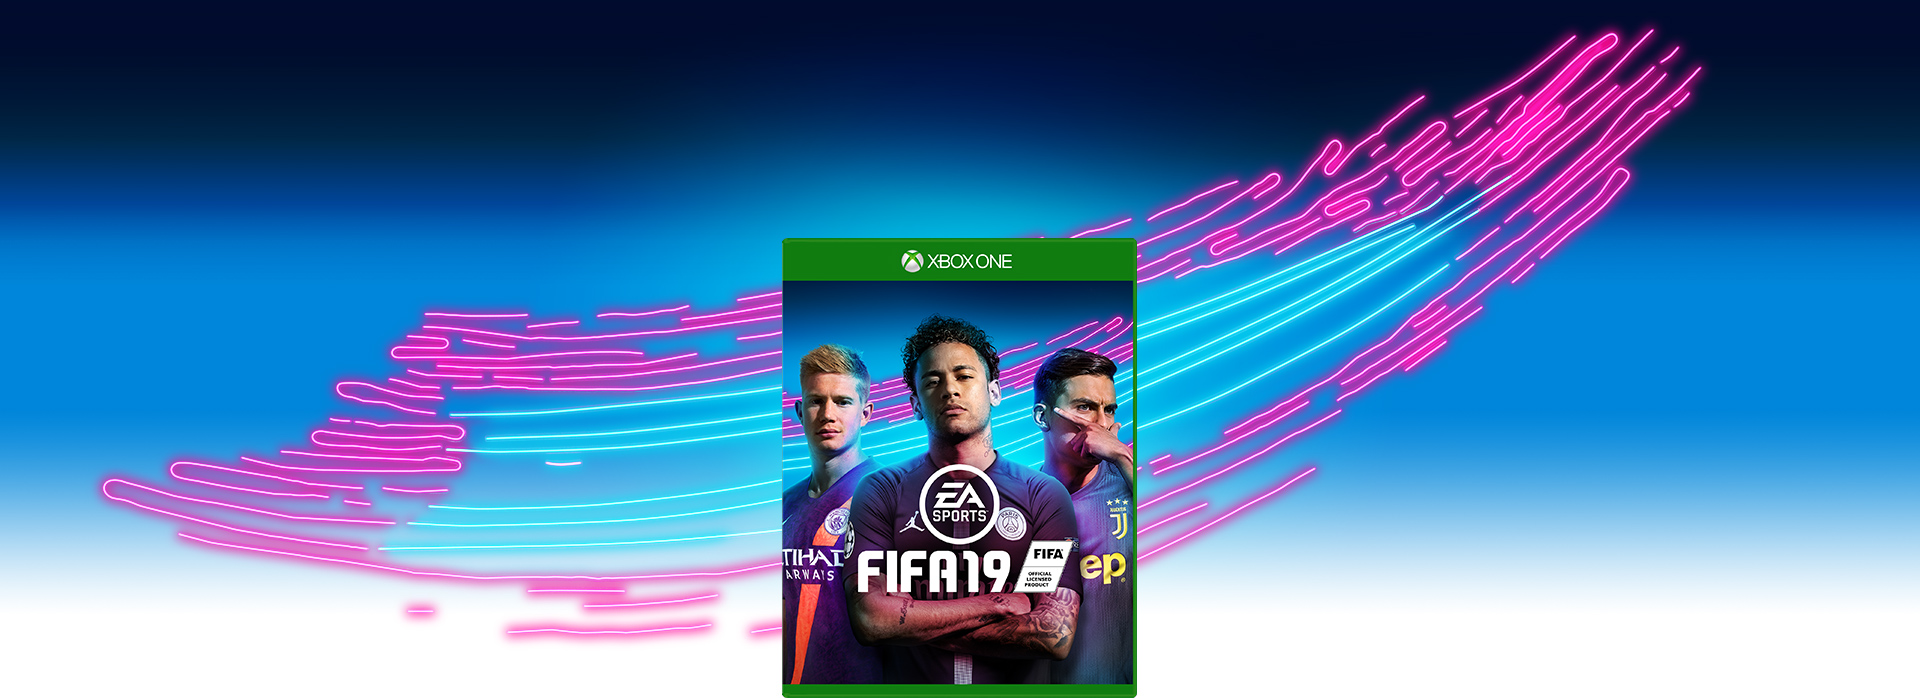 FIFA 19 for Xbox One